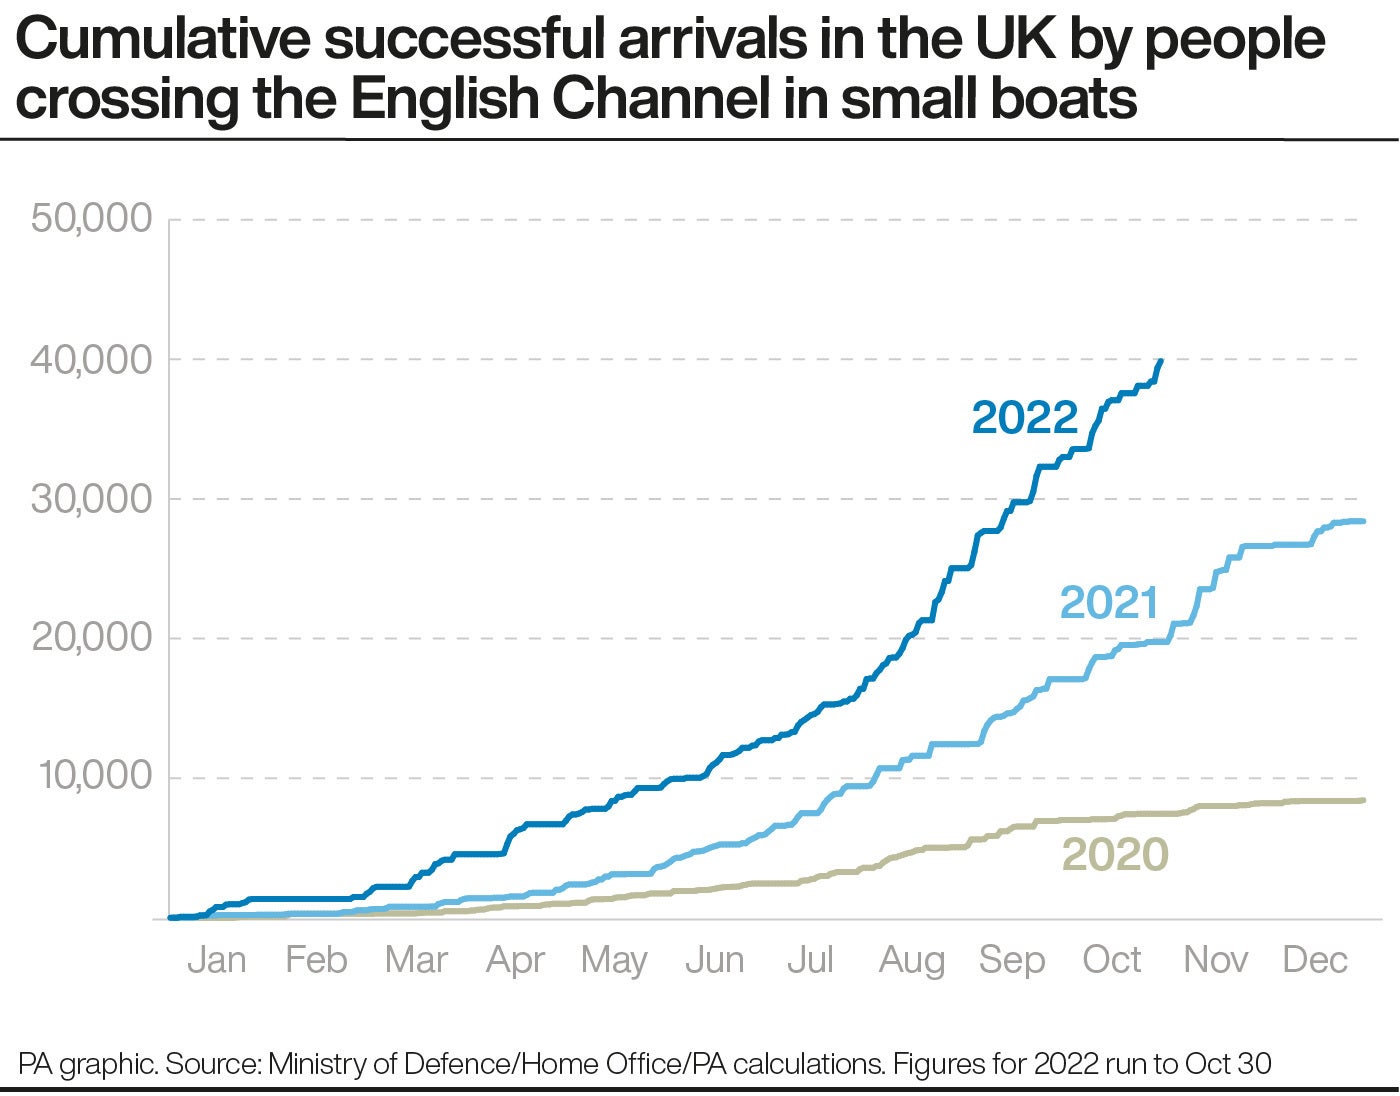 This chart shows the cumulative successful crossings of the Channel by people in small boats over the last three years